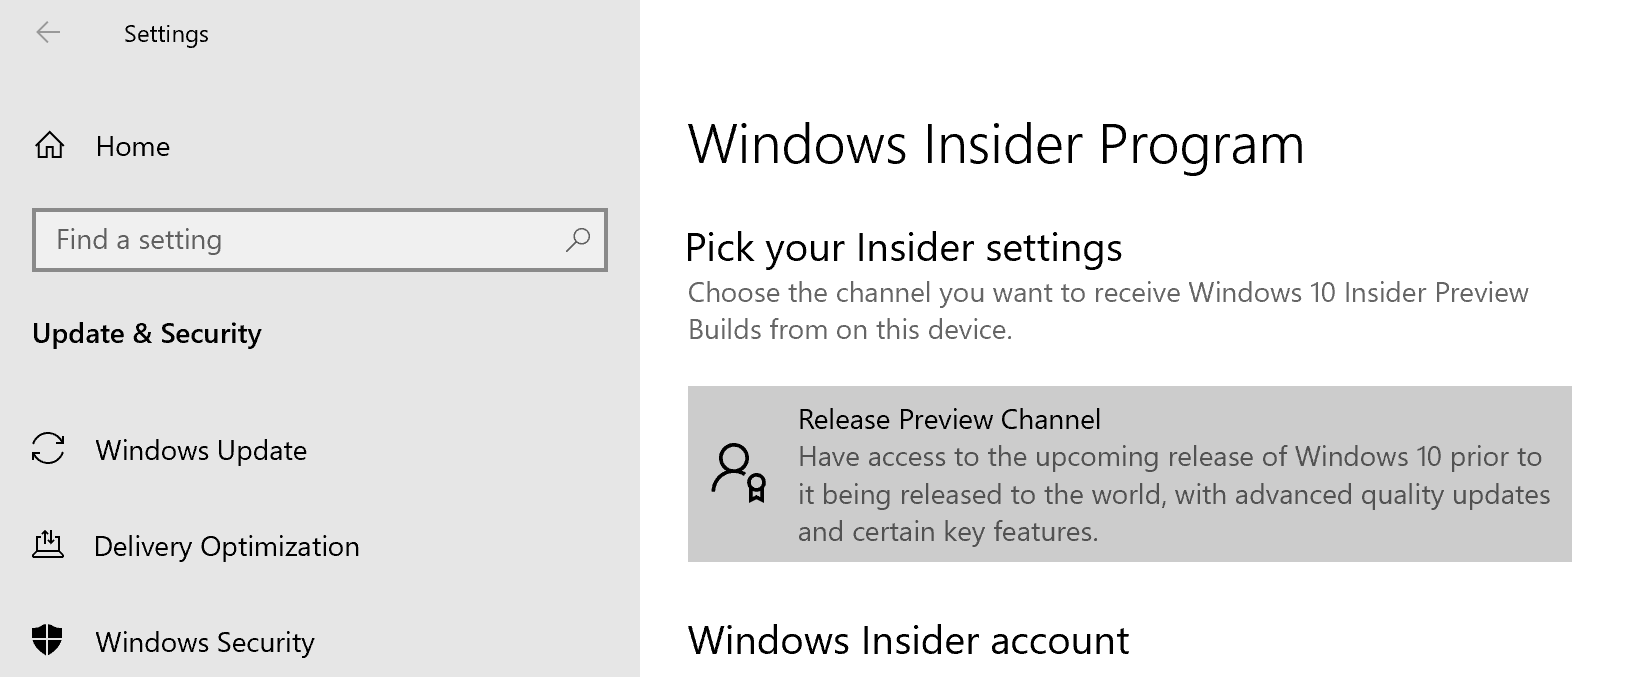 Windows Insider Release Preview Channel